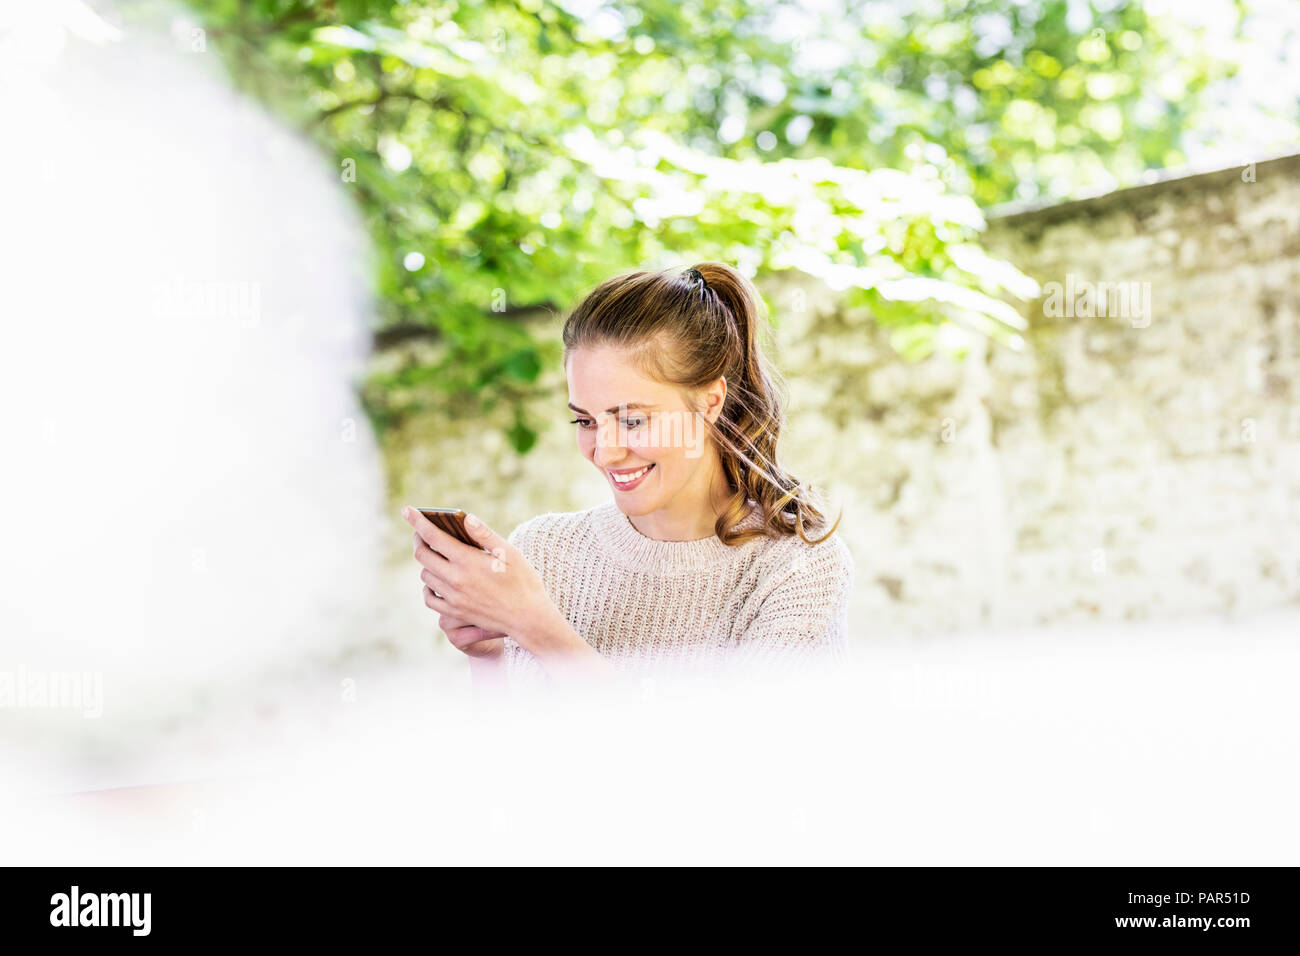 Smiling woman looking at cell phone outdoors Stock Photo